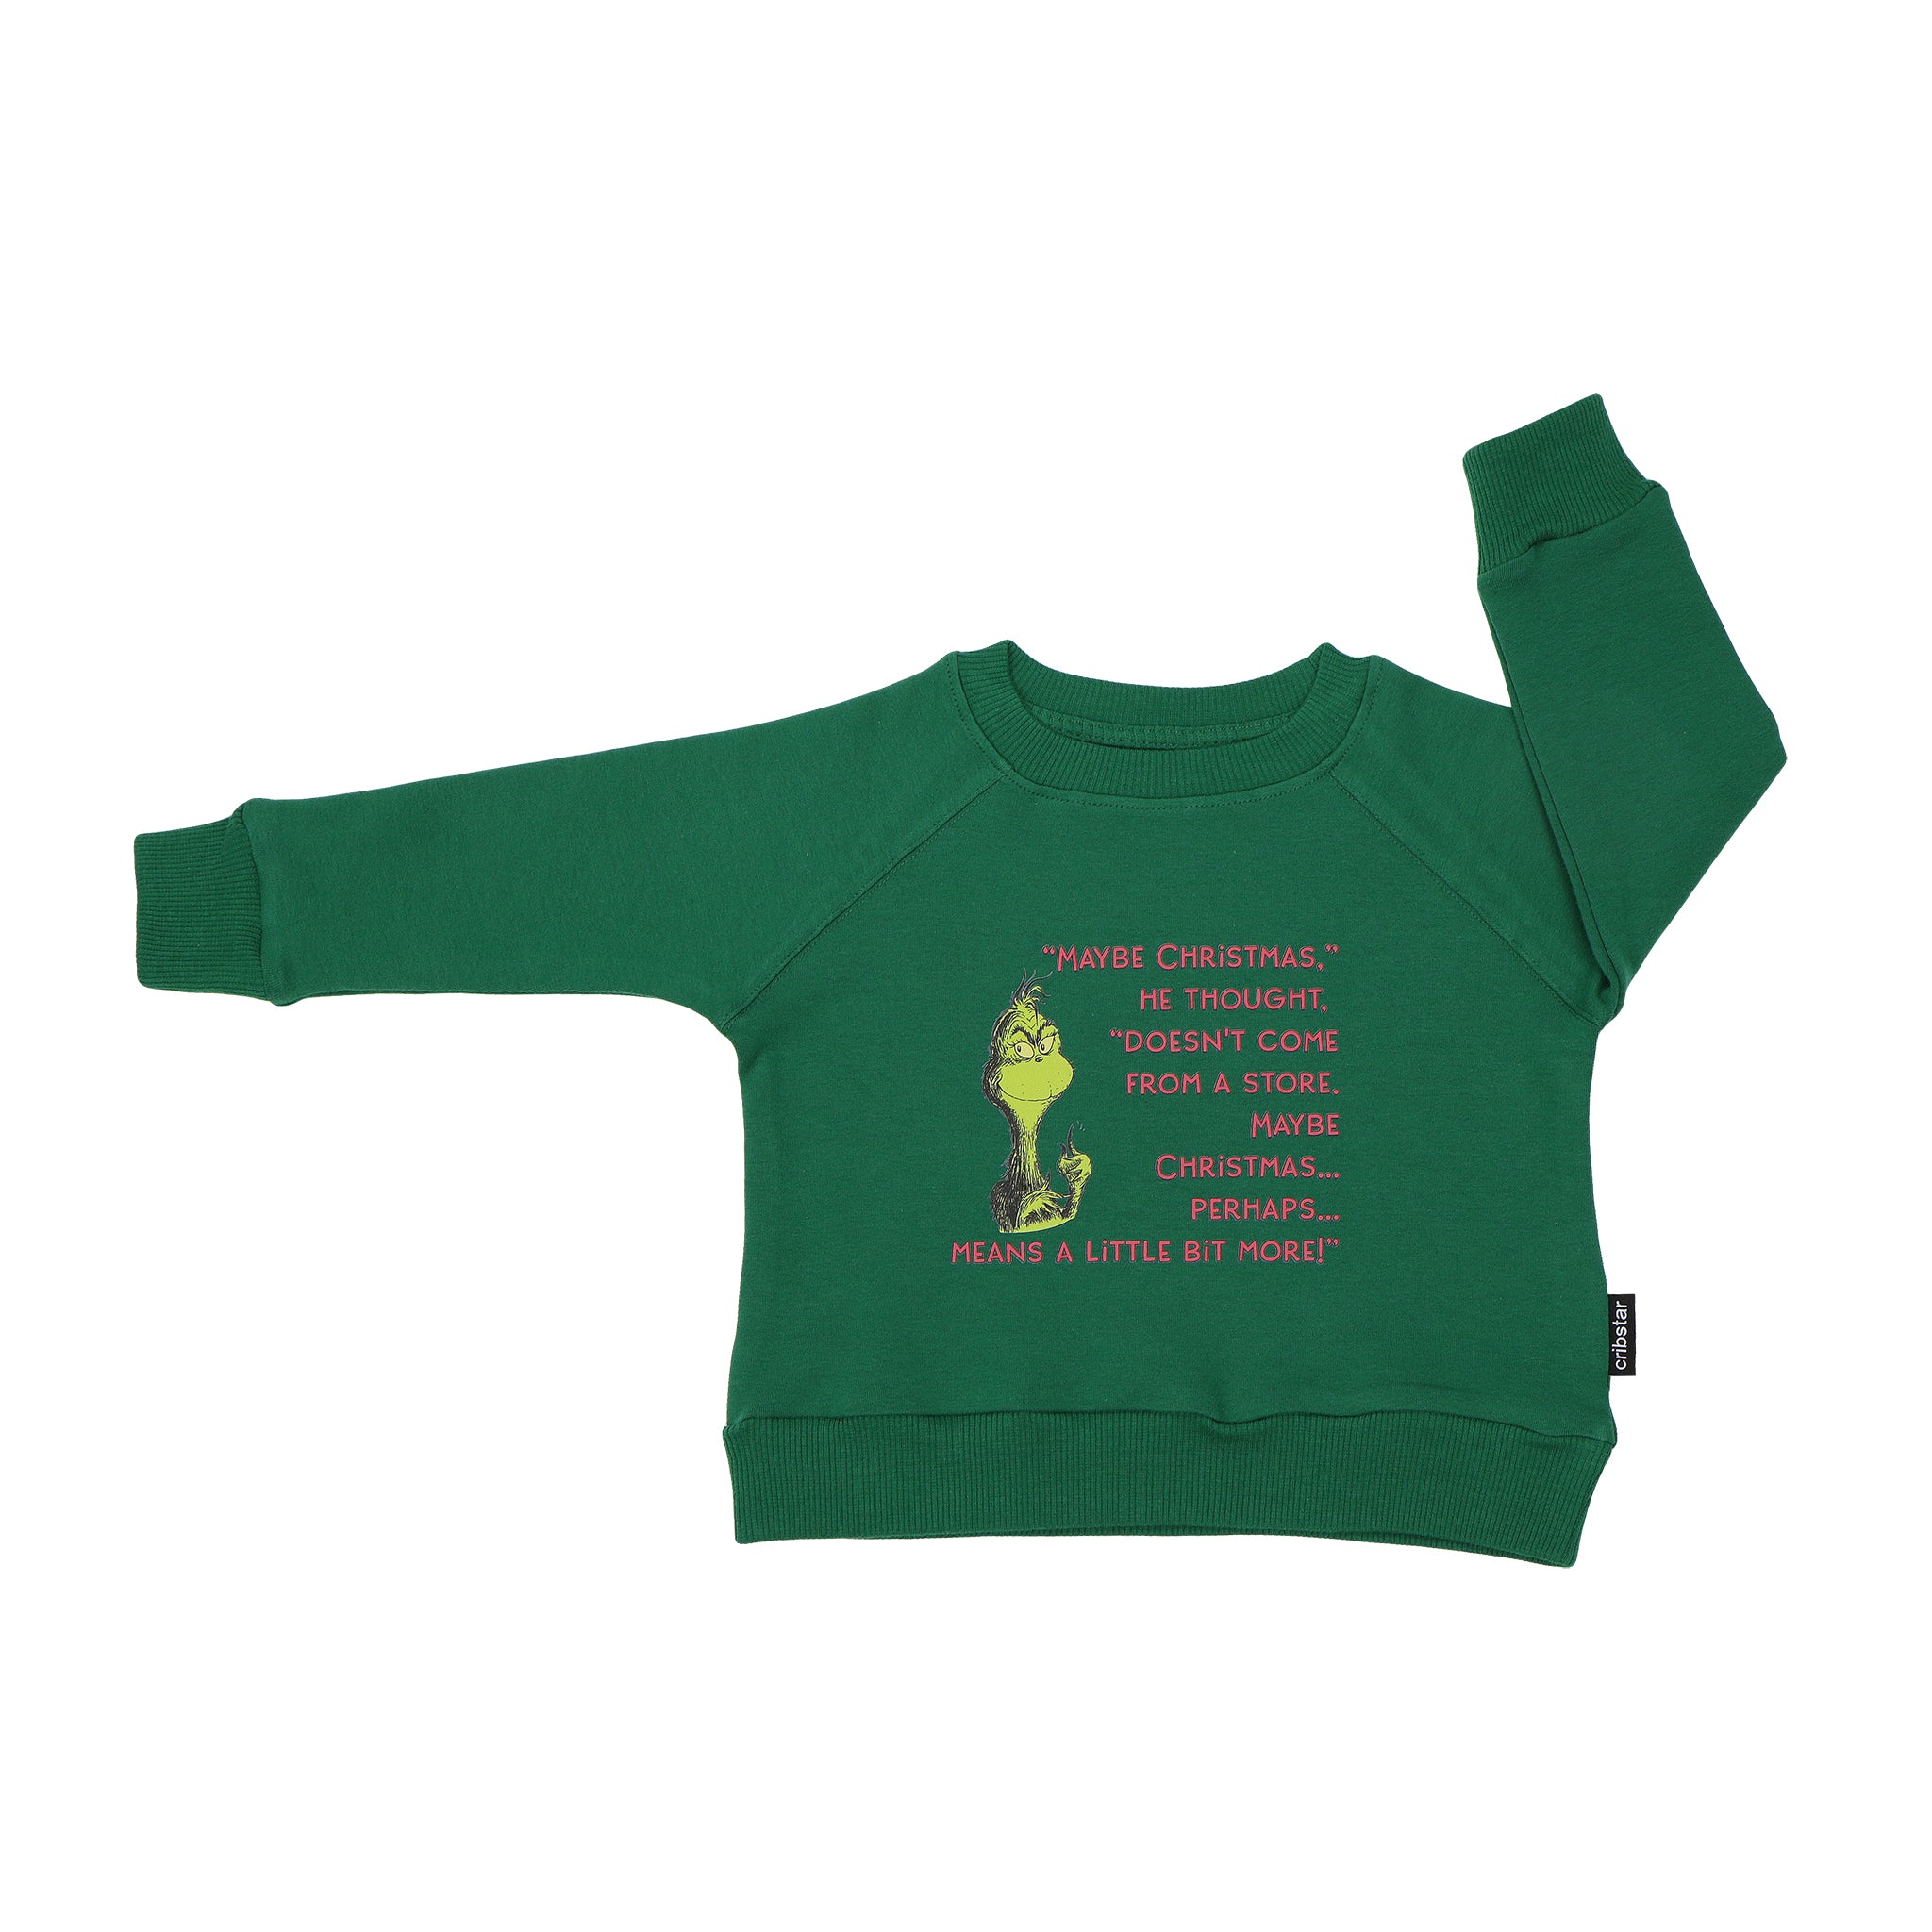 The Grinch Sweatshirt - Christmas Means More - Forrest Green